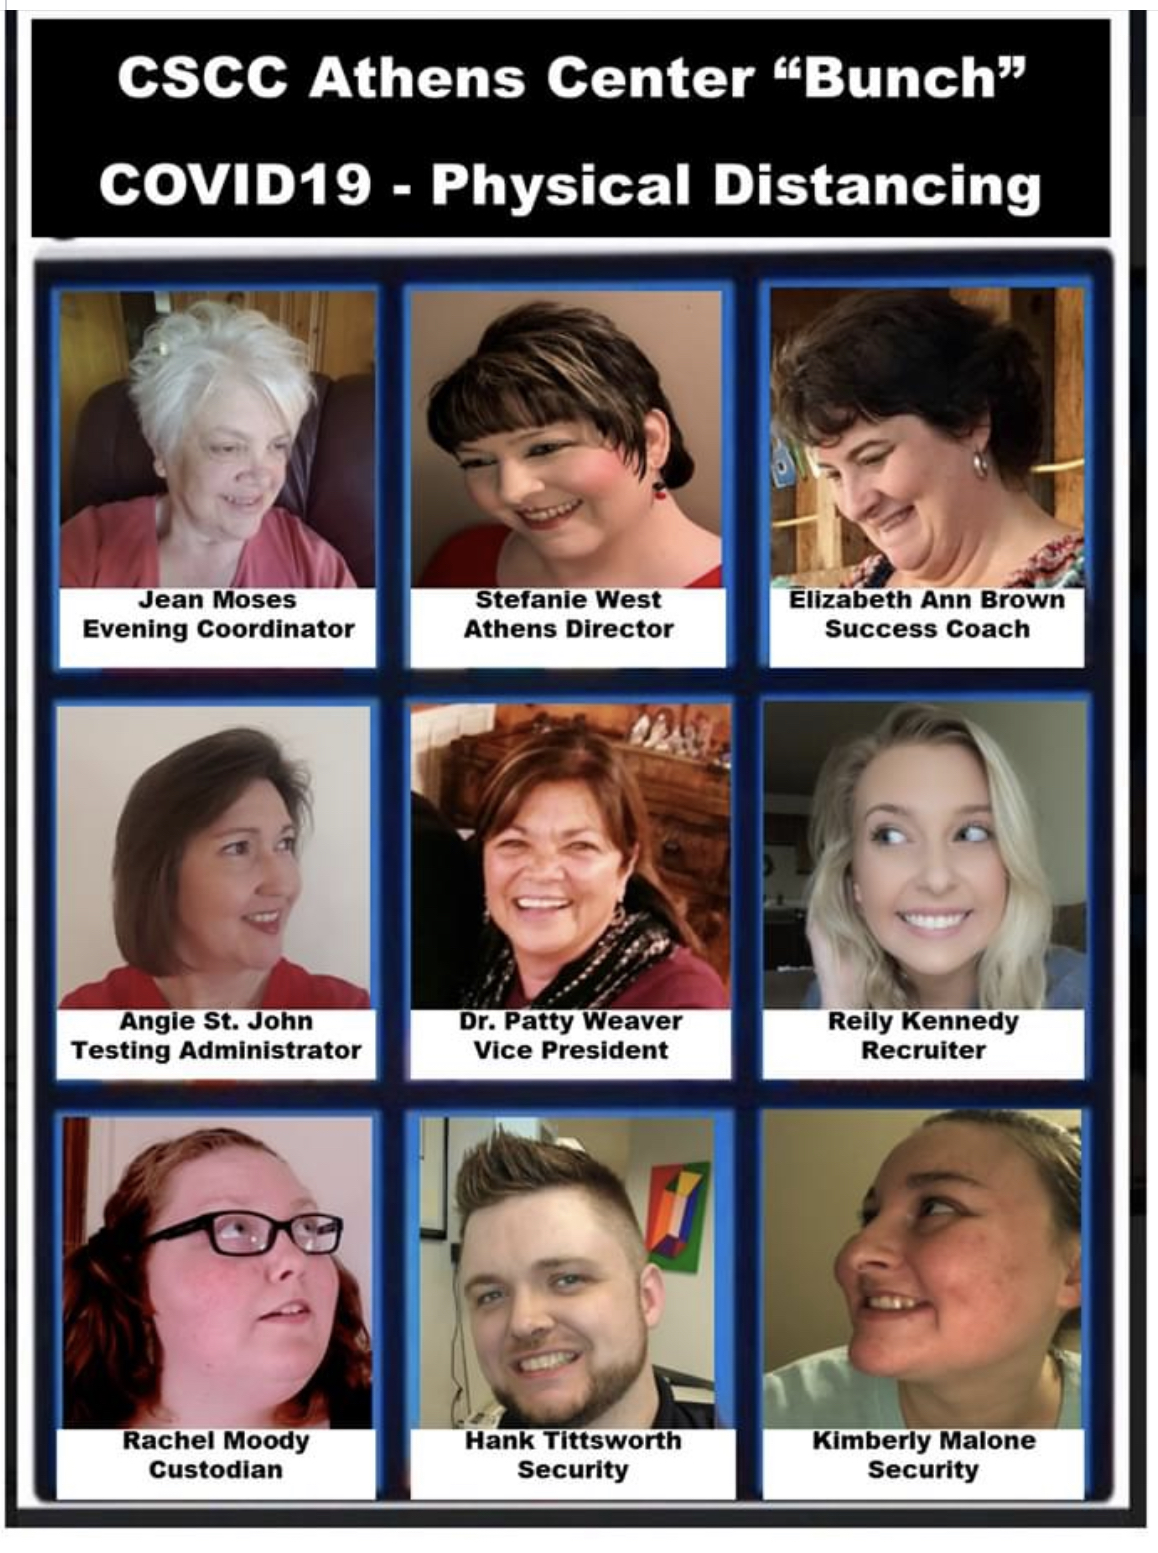 Image of Athens Center Staff in boxes - Brady Bunch reference.